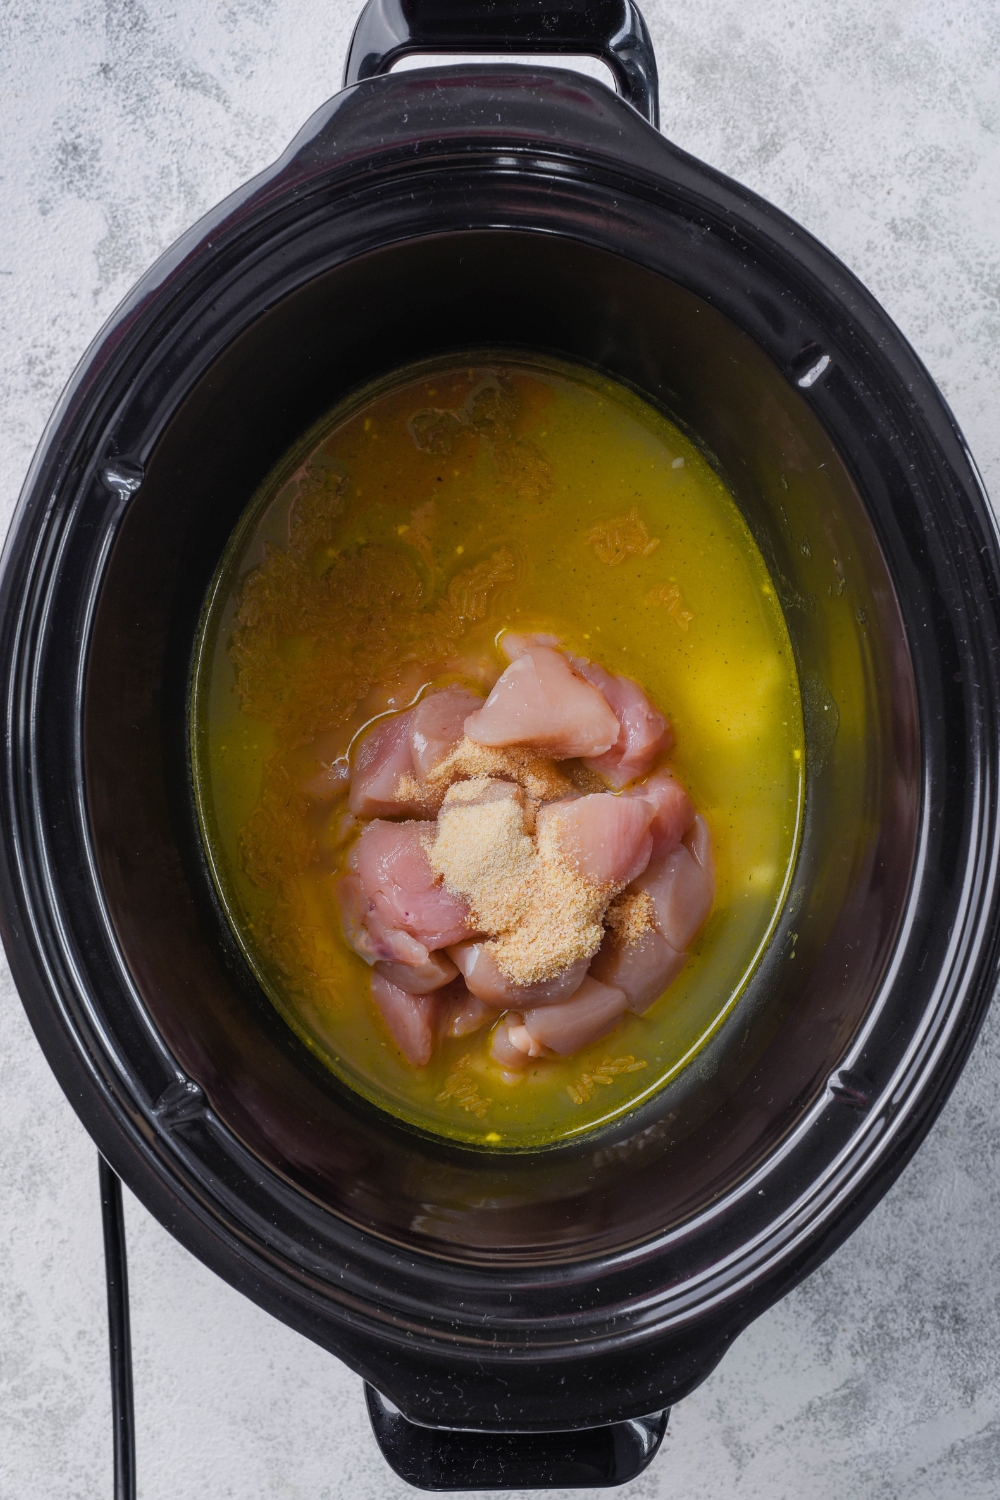 Chicken stock, seasonings, and chicken in a crock pot.